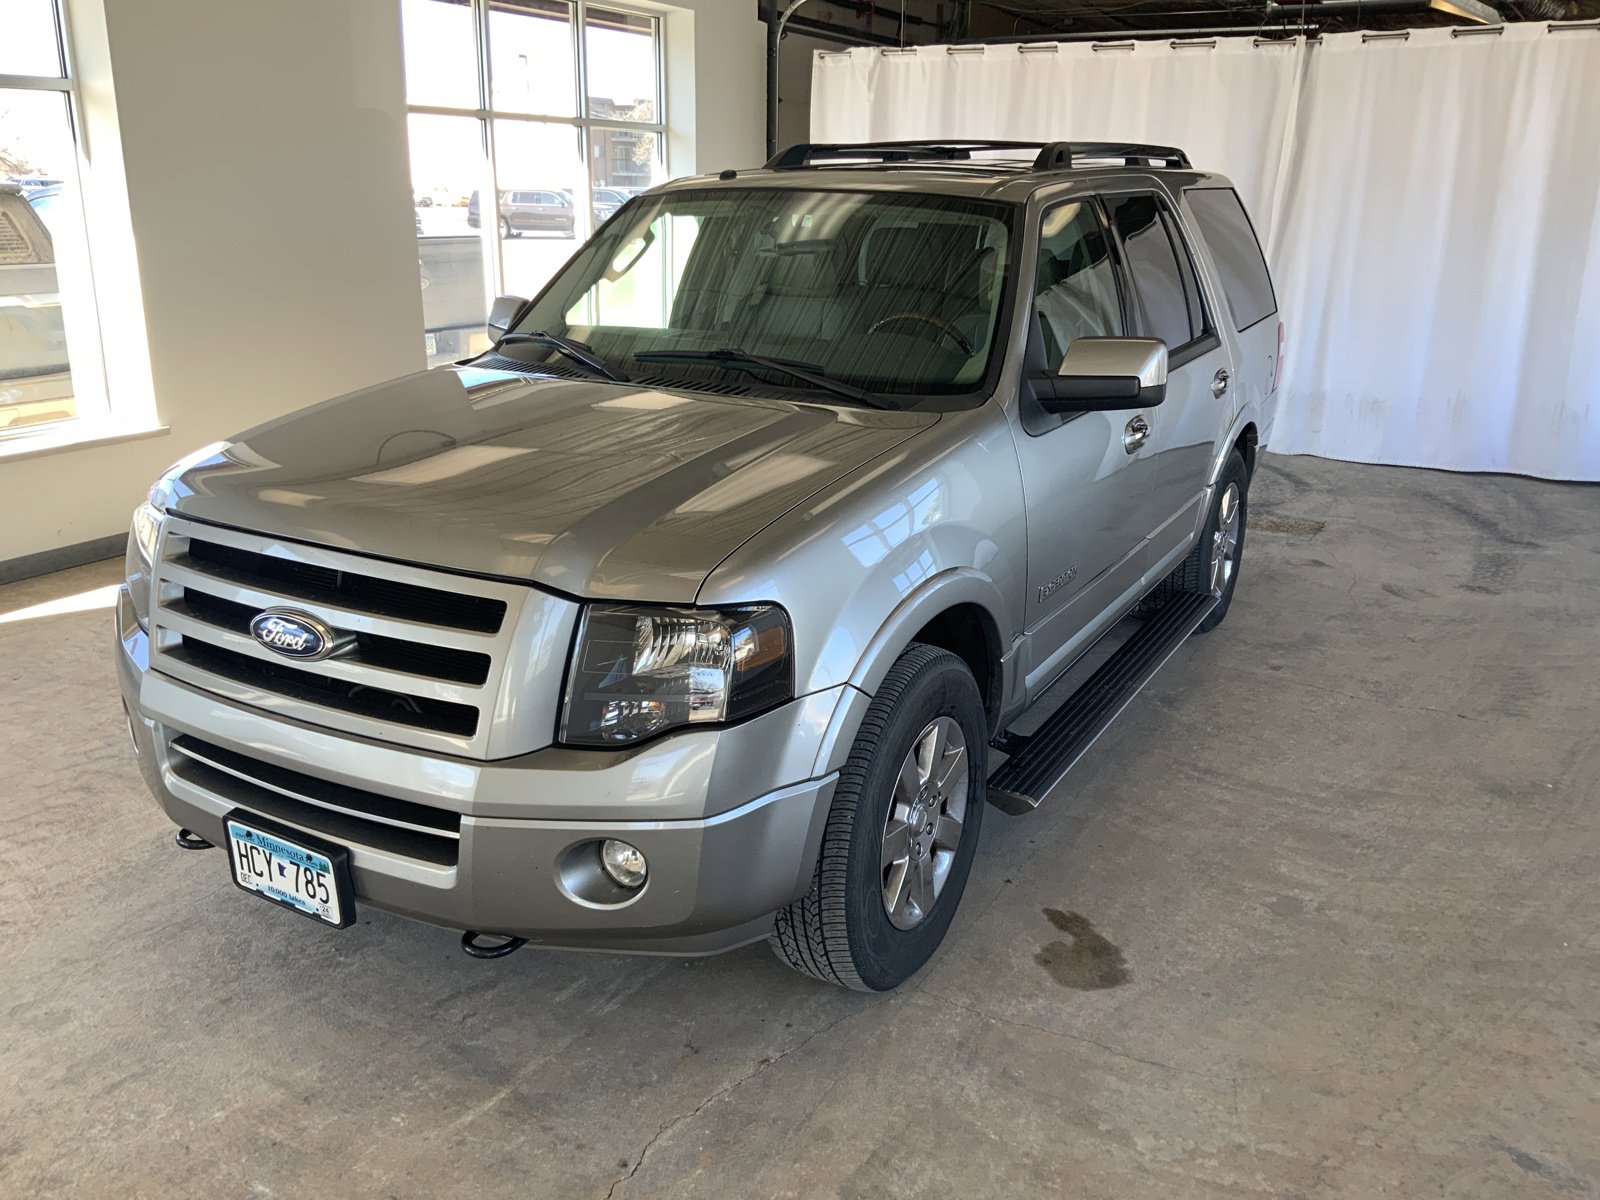 Used 2008 Ford Expedition Limited with VIN 1FMFU20508LA88253 for sale in Alexandria, Minnesota